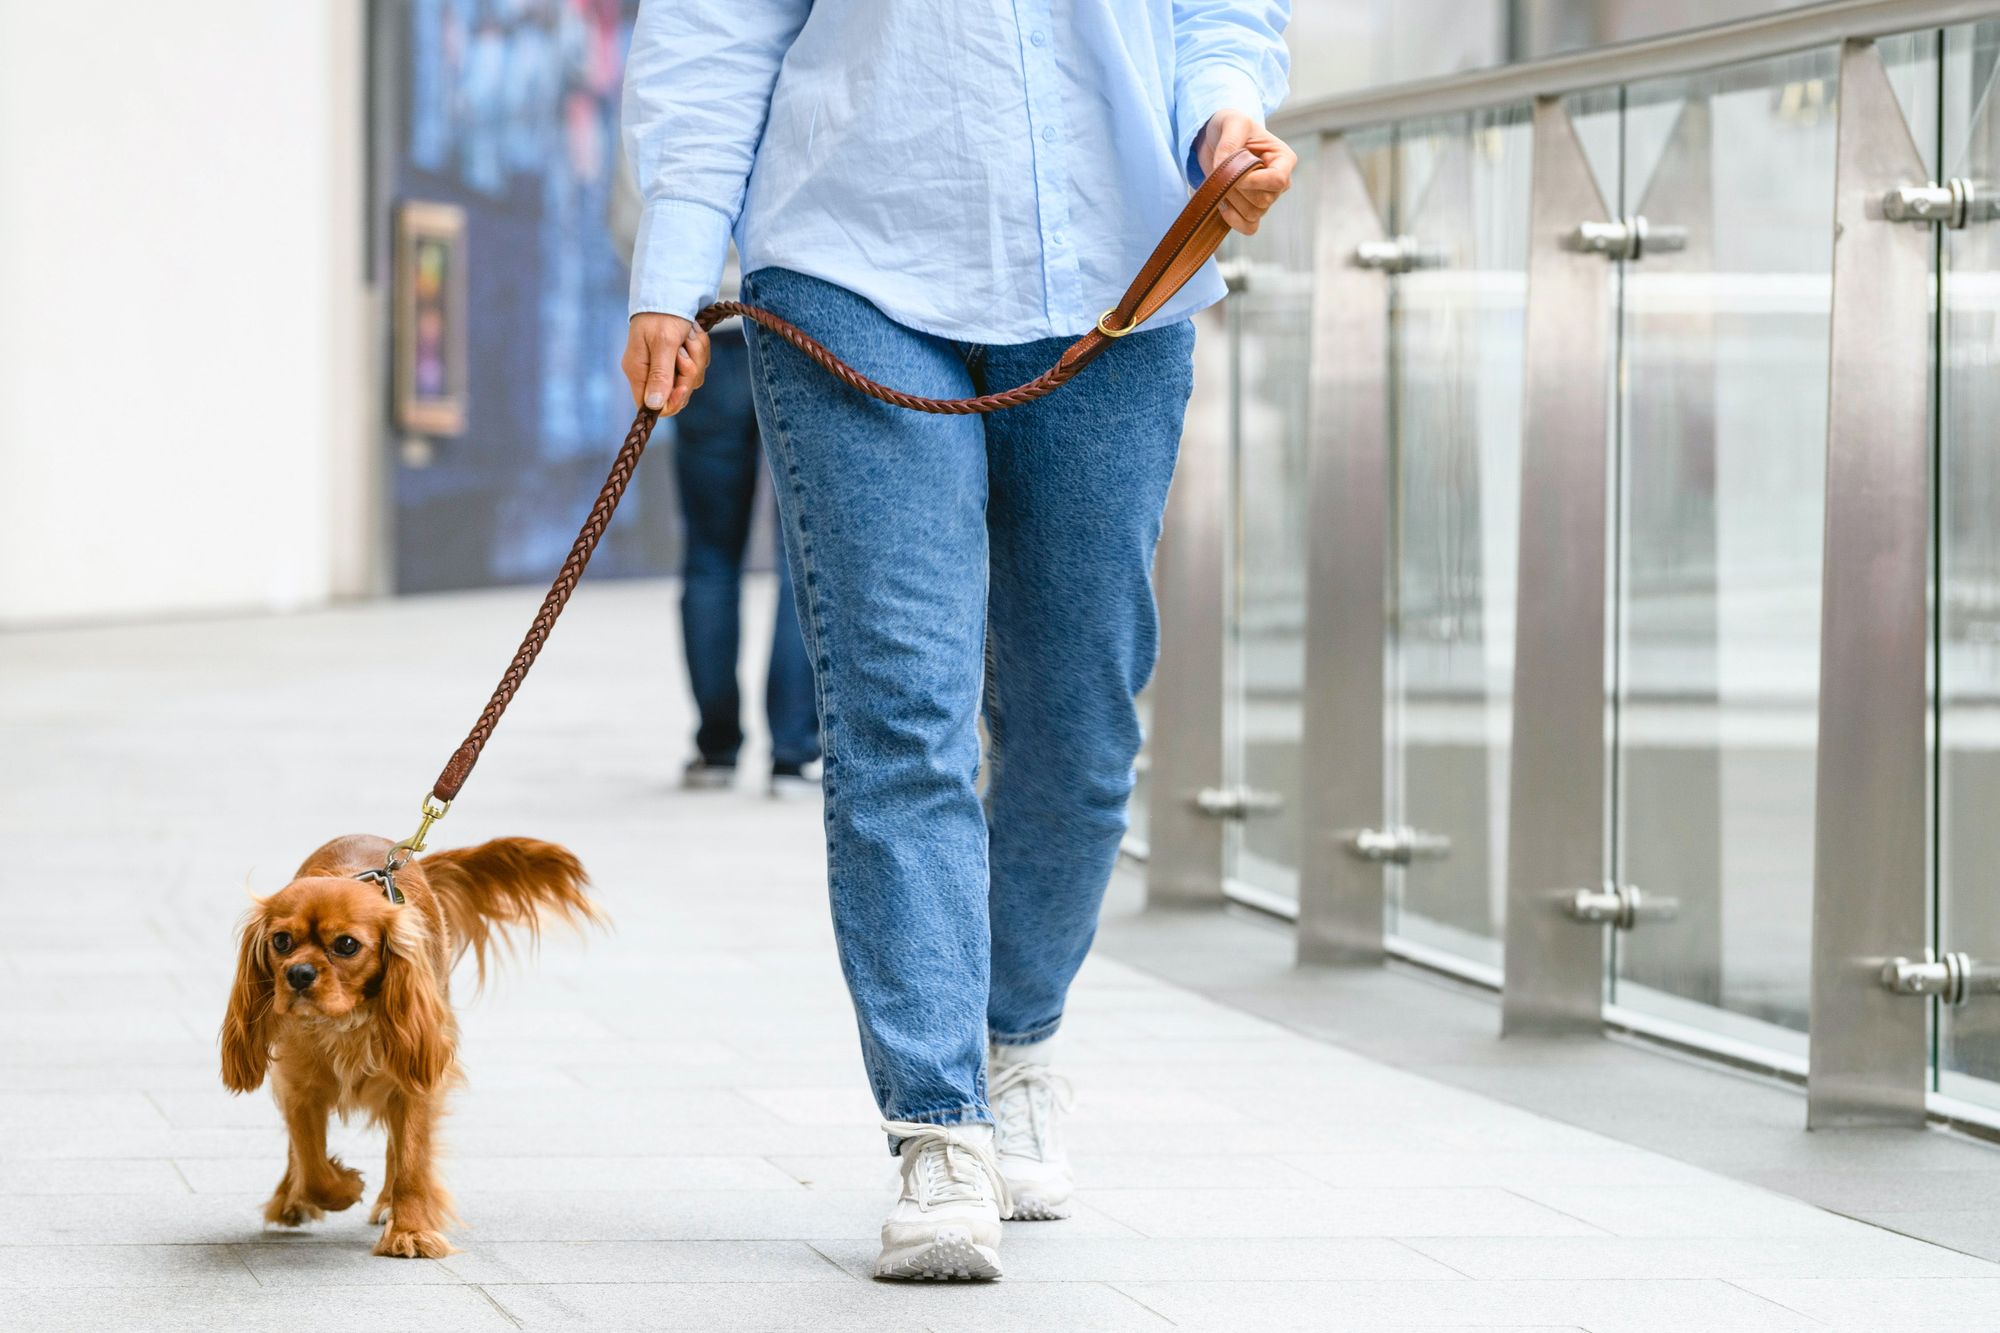 Dog-Friendly Shopping Centers in Miami